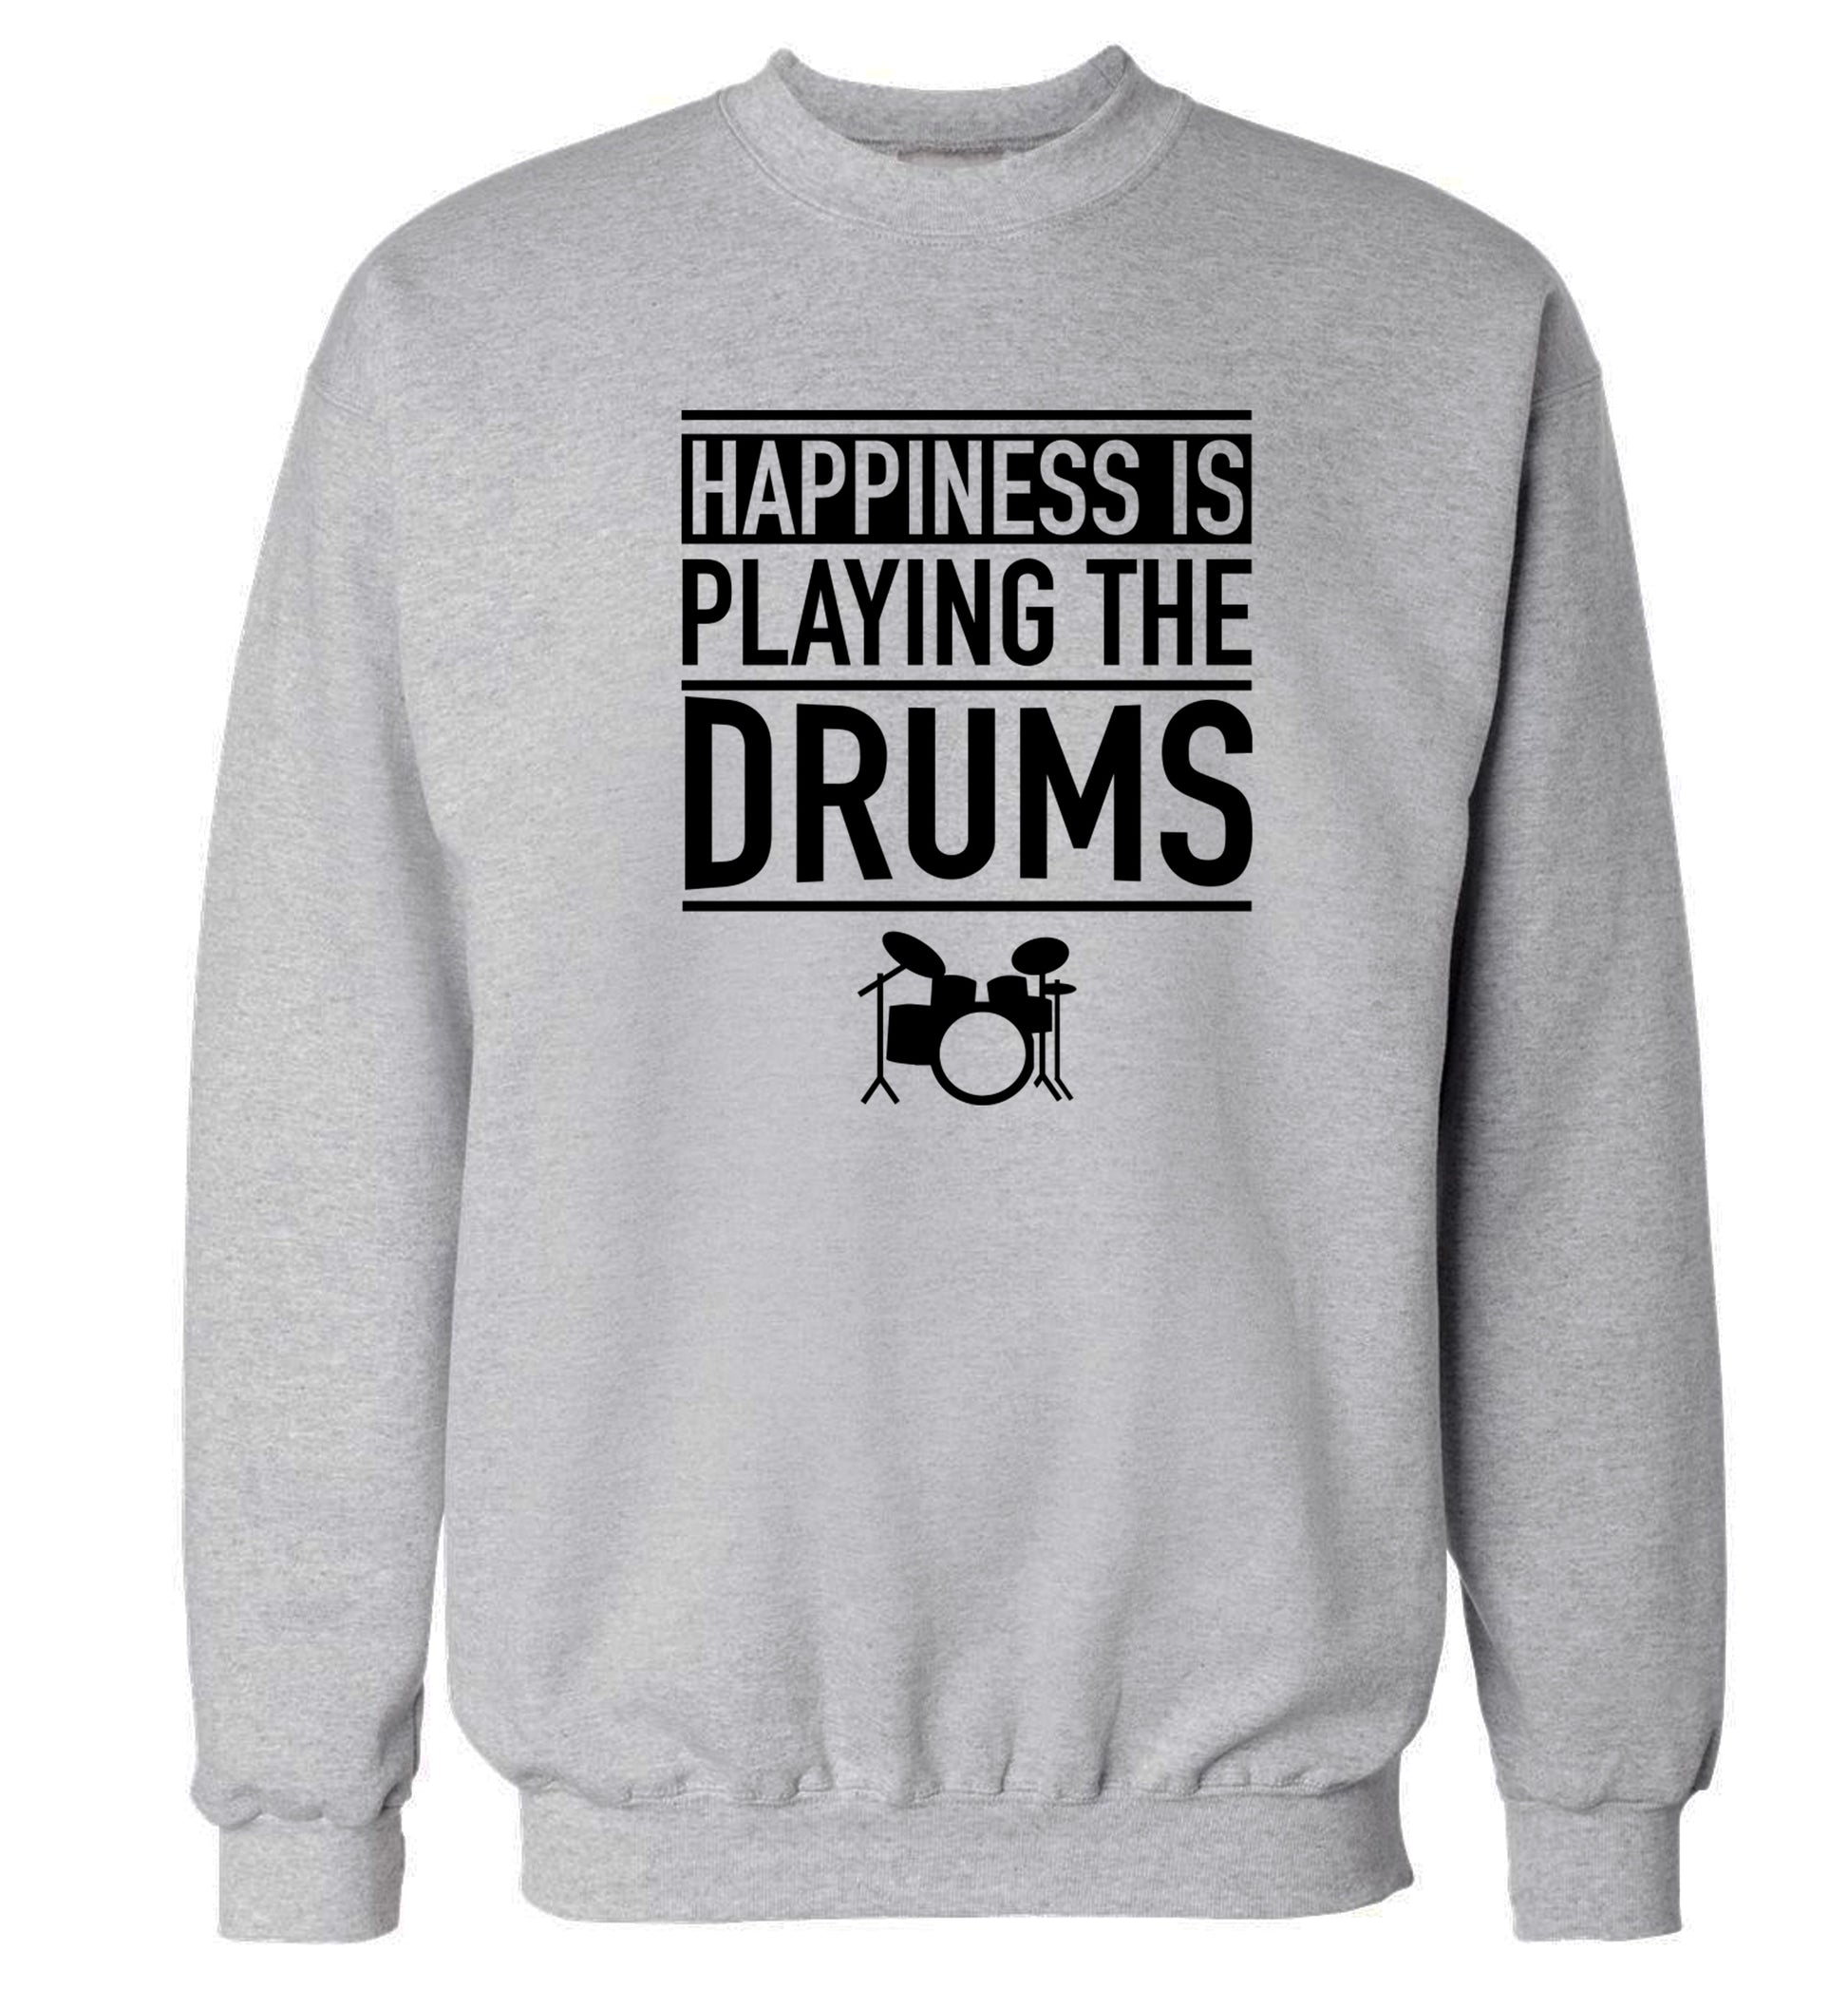 Happiness is playing the drums Adult's unisex grey Sweater 2XL